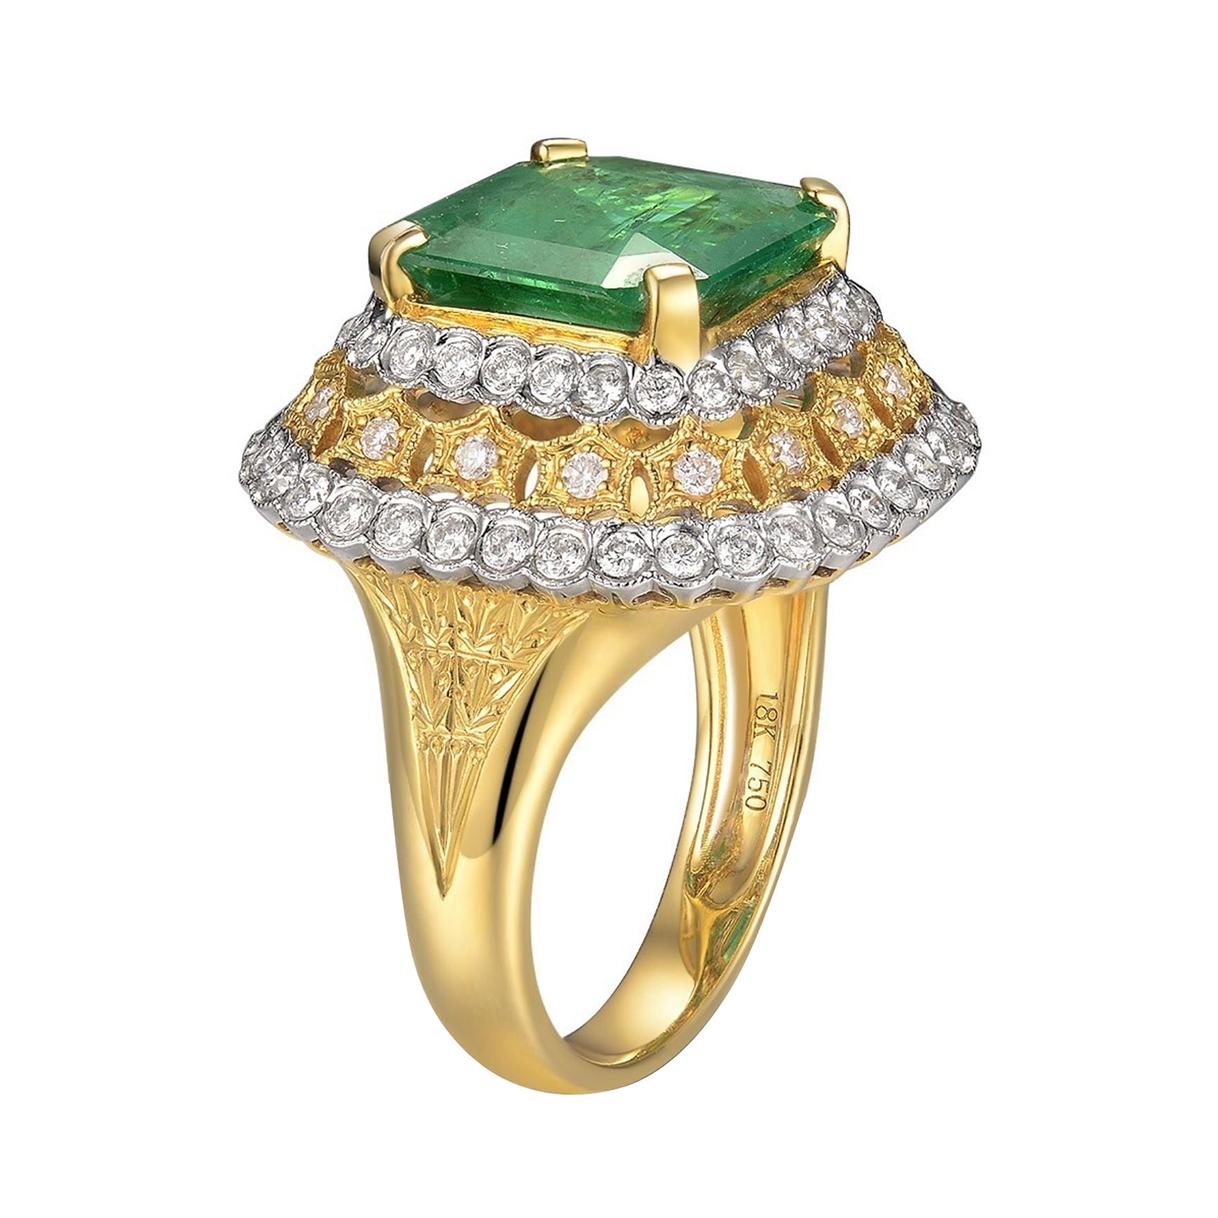 Emerald Diamond Ring 18K Yellow Gold For Sale